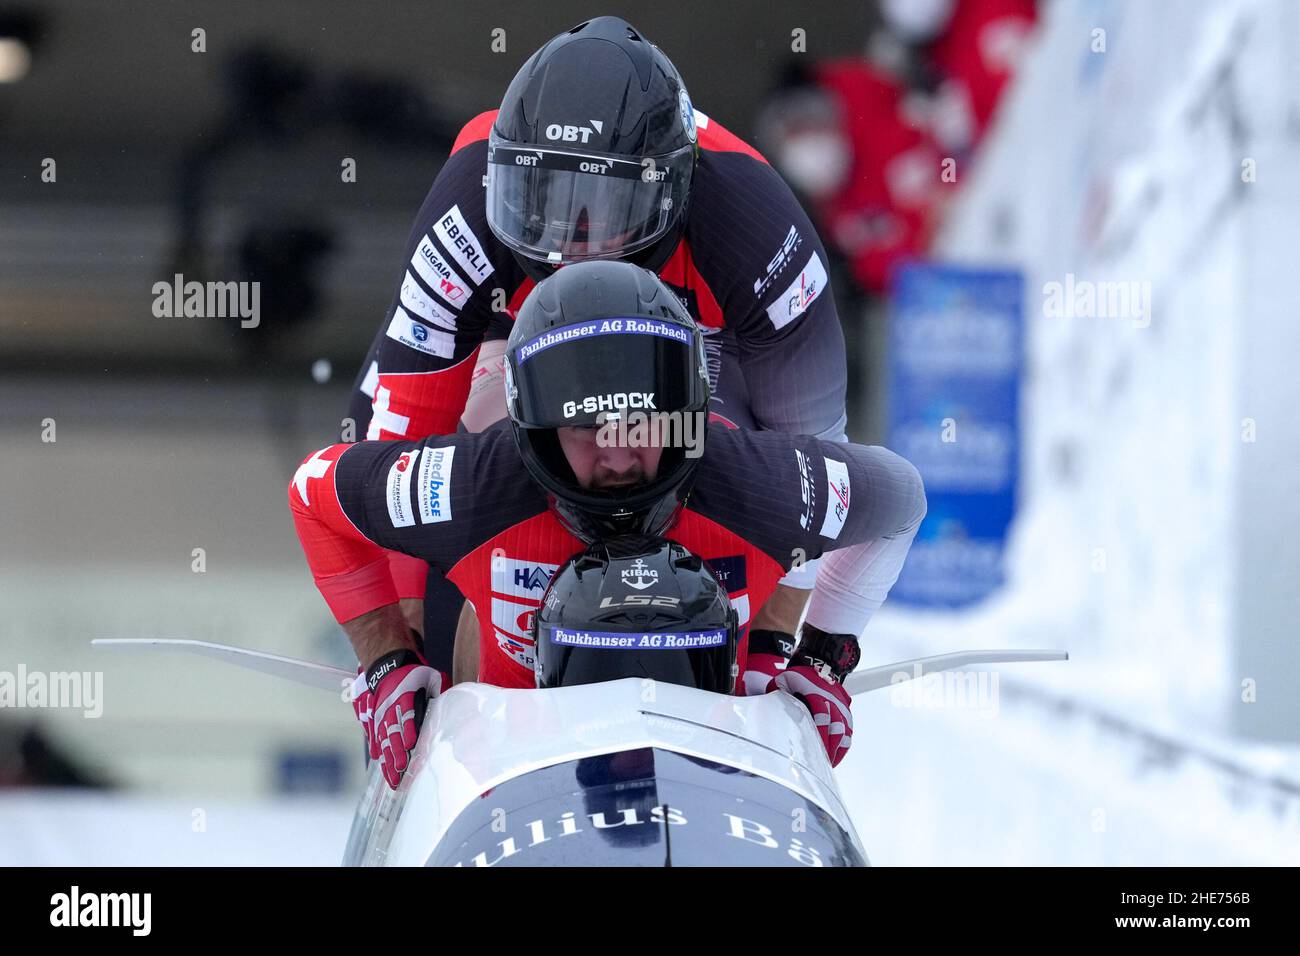 Winterberg, Germany. 09th Jan, 2022. WINTERBERG, GERMANY - JANUARY 9: Simon Friedli, Adrian Faessler, Fabio Badraun, Andreas Haas of Switzerland compete in the 4-man Bobsleigh during the BMW IBSF Bob & Skeleton World Cup at VELTINS-EisArena on January 9, 2022 in Winterberg, Germany (Photo by Patrick Goosen/Orange Pictures) Credit: Orange Pics BV/Alamy Live News Stock Photo